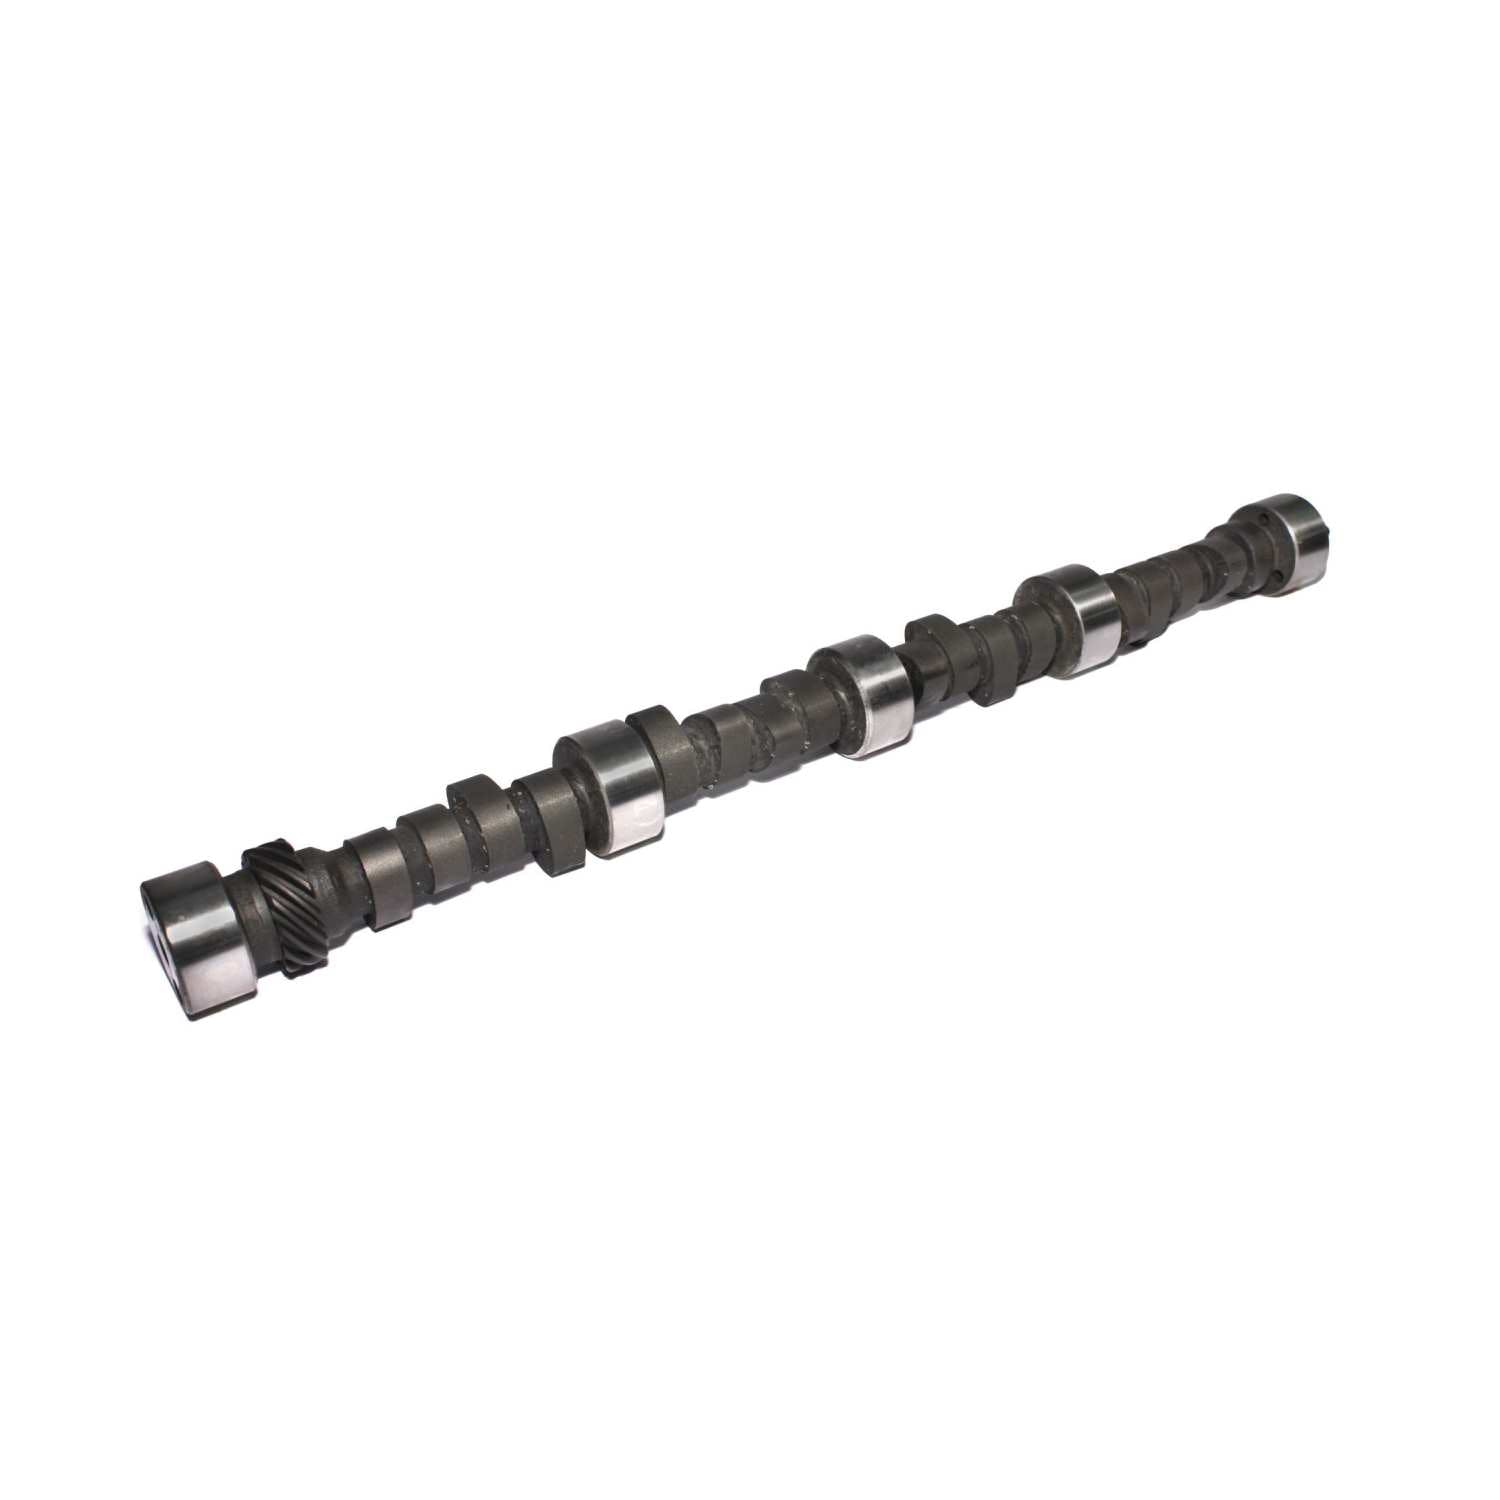 Competition Cams 11-653-47 Xtreme Energy 4/7 Swap Firing Order Camshaft